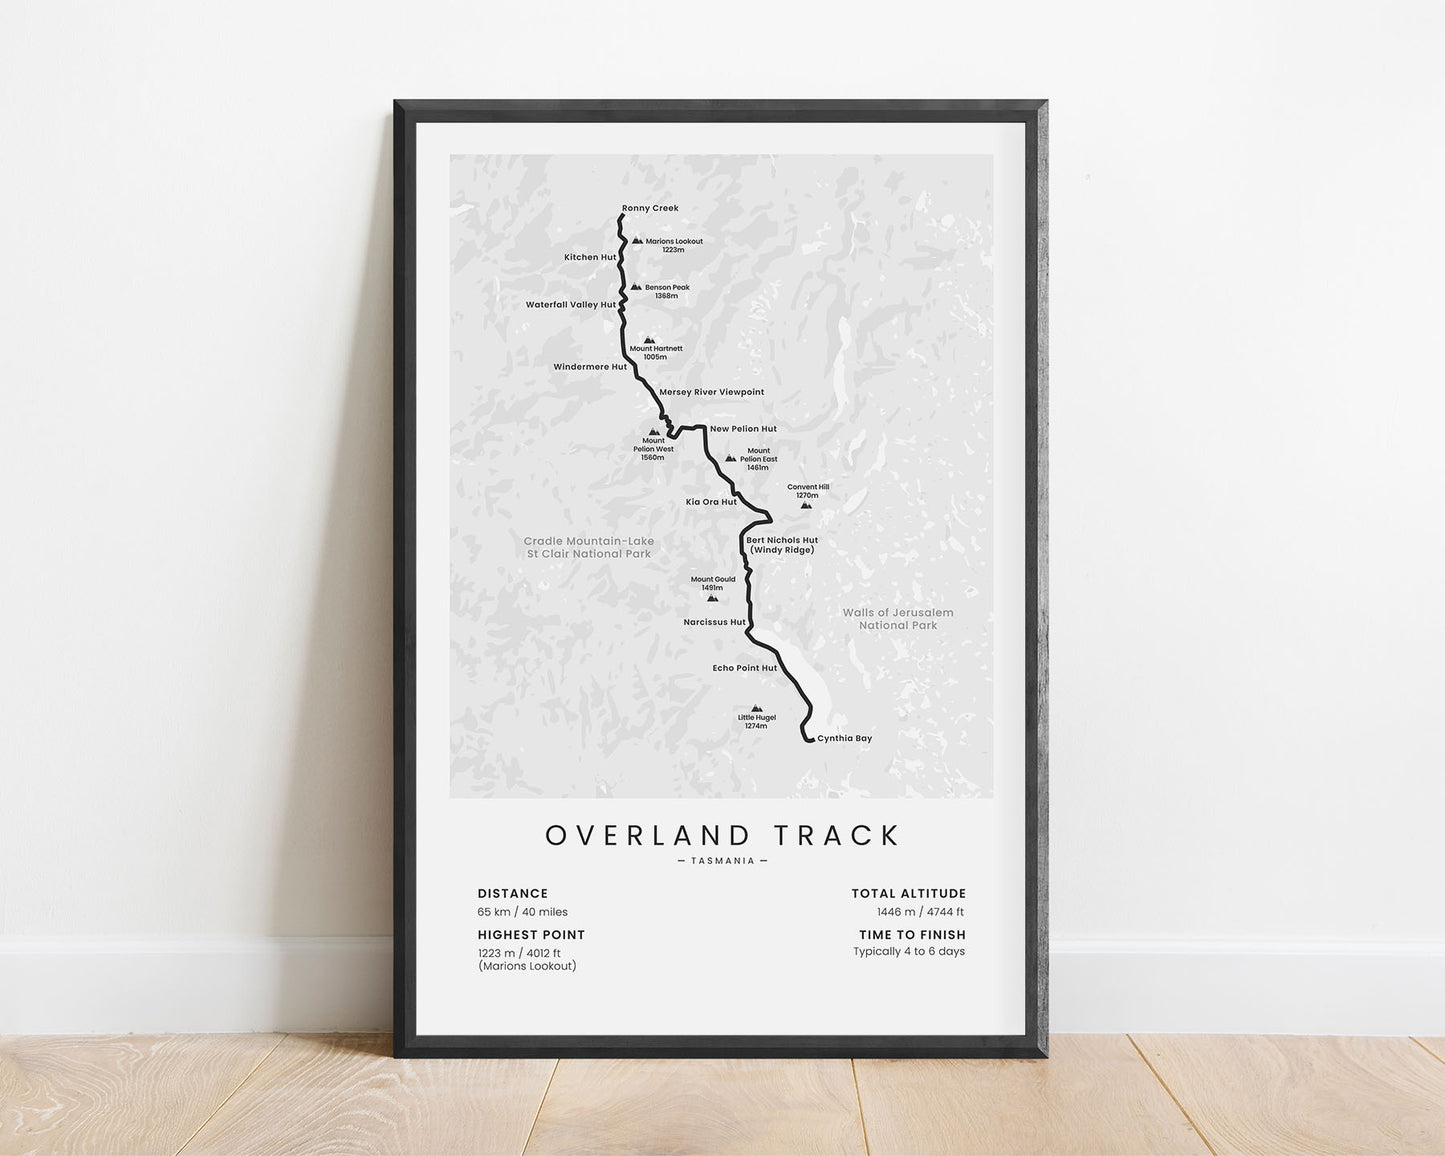 Overland Track (Tasmania) hike wall map with white background